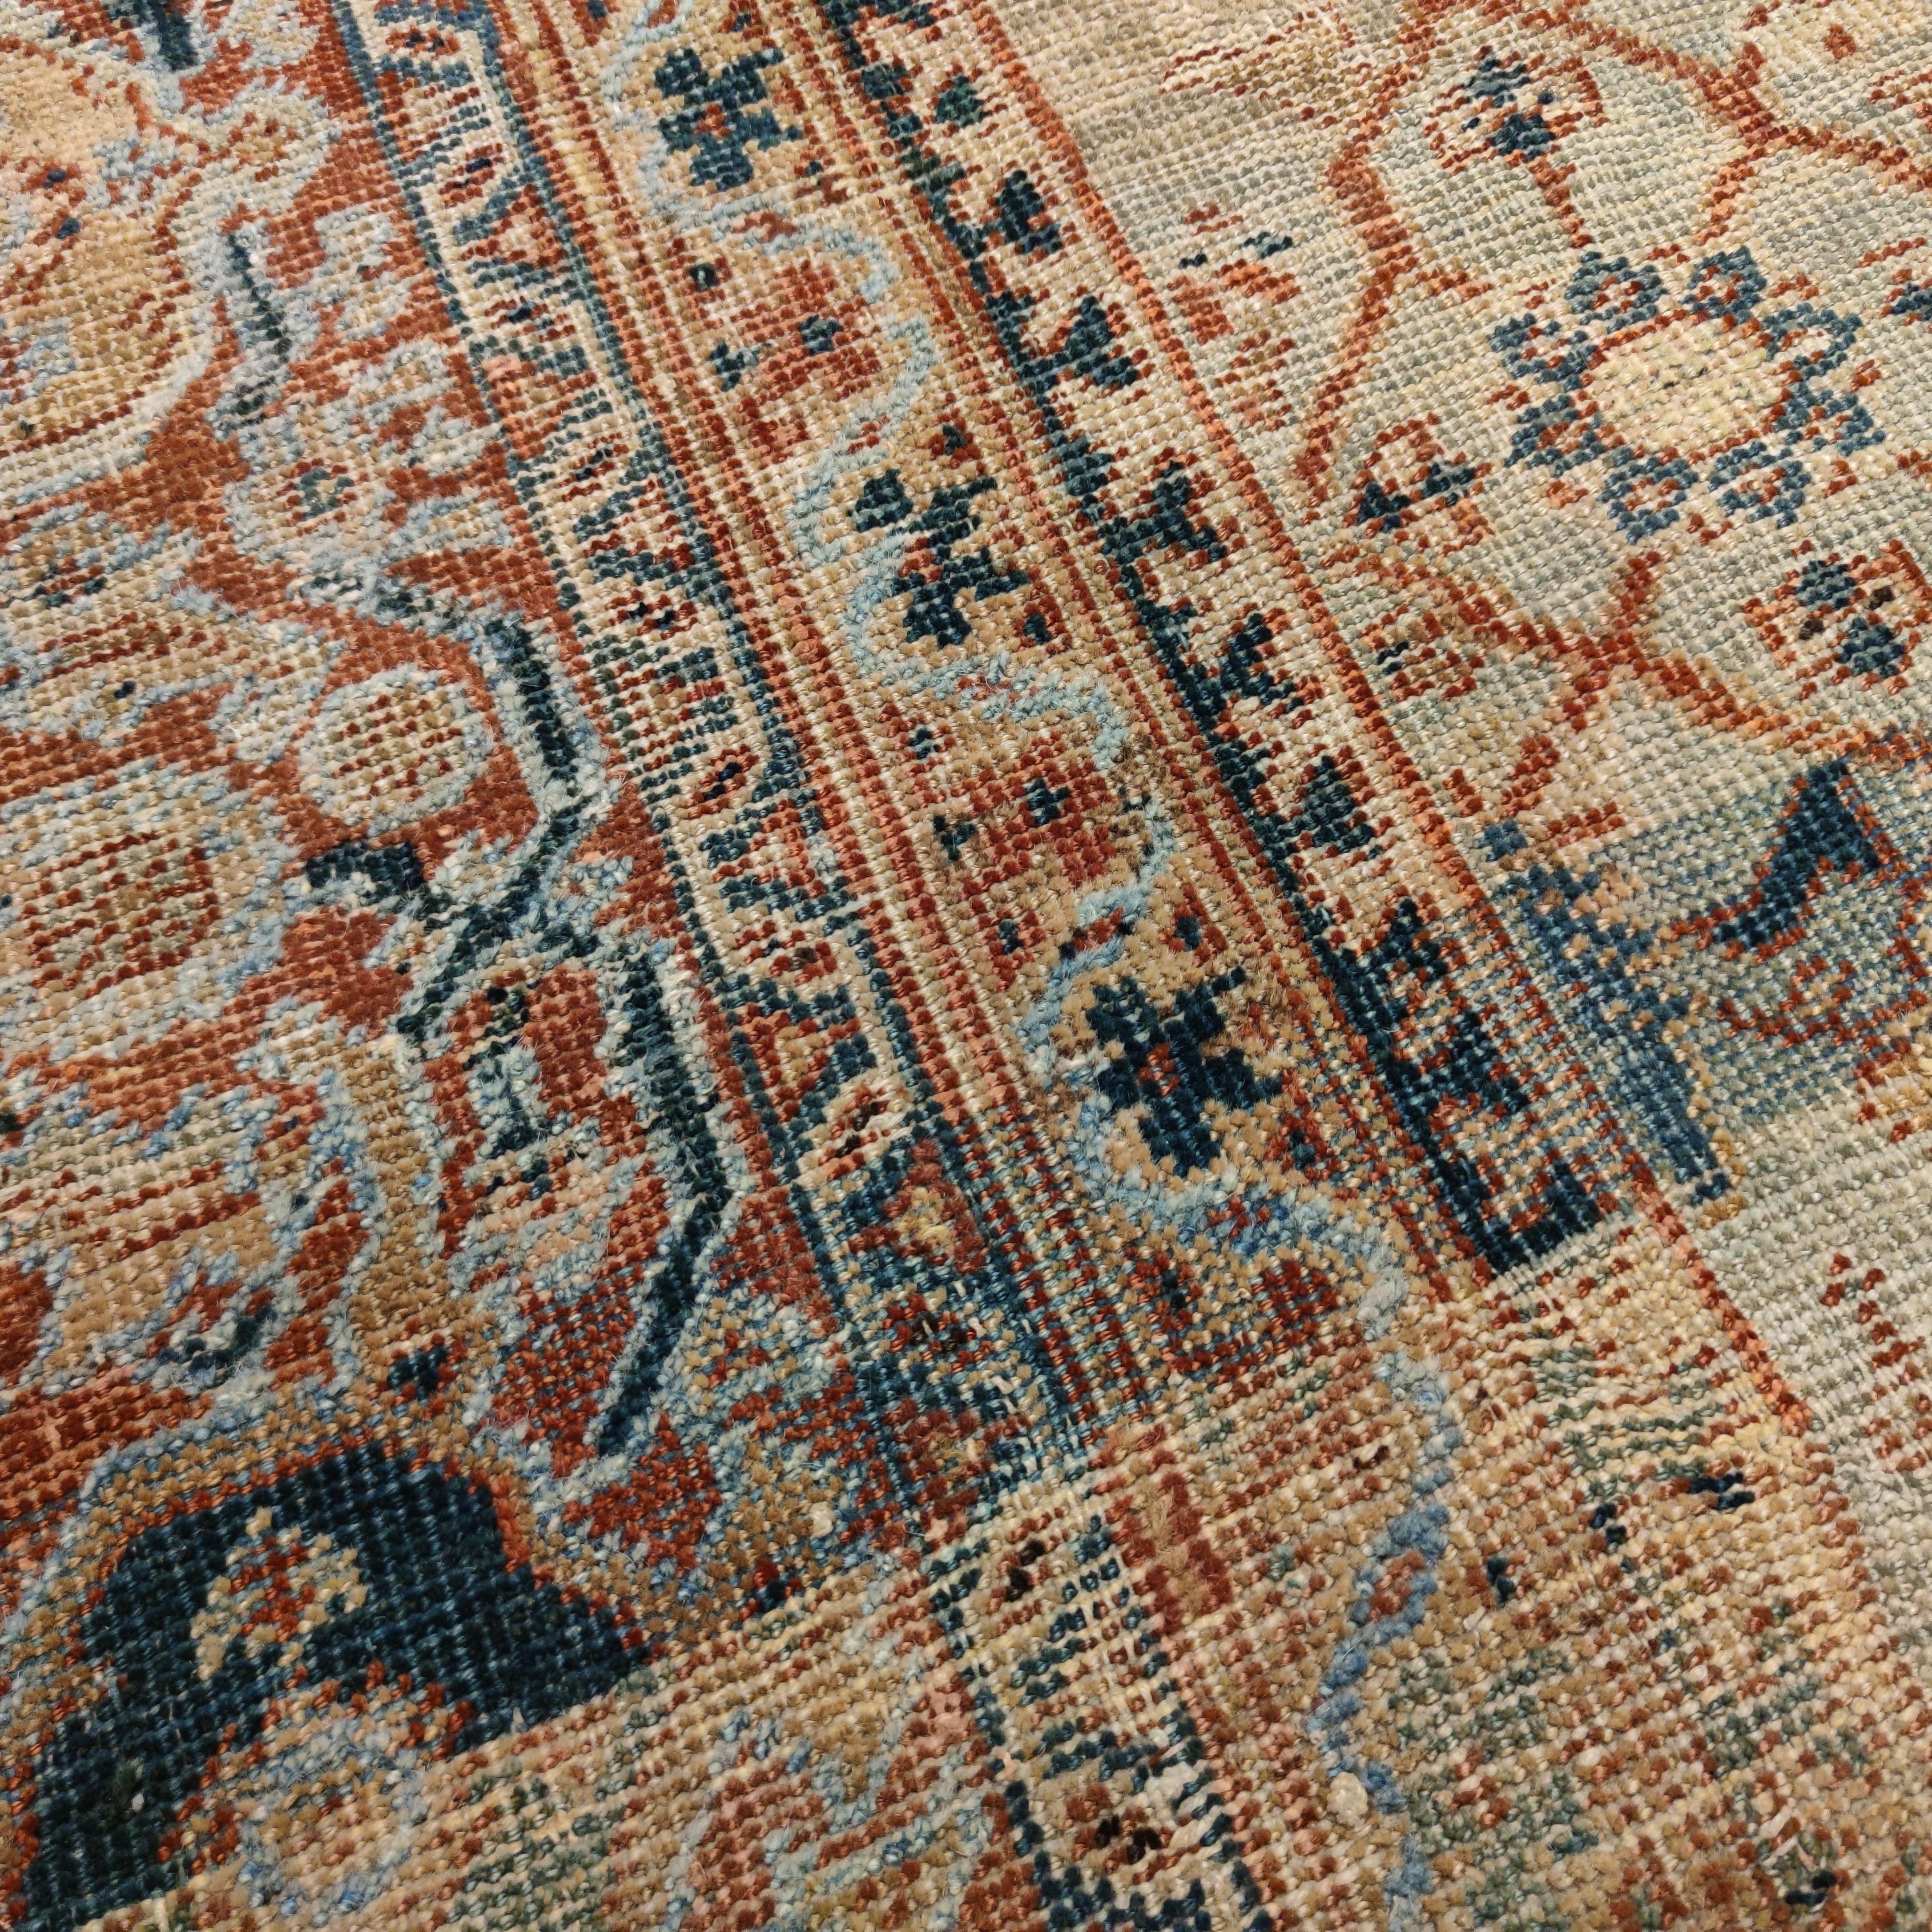 The carpets woven by the Anglo-Swiss firm of Ziegler & Co. during the late nineteenth century in the region of Arak are often characterised by classic Persian patterns rendered in highly refined colours, where the wool yarns are masterfully dyed so